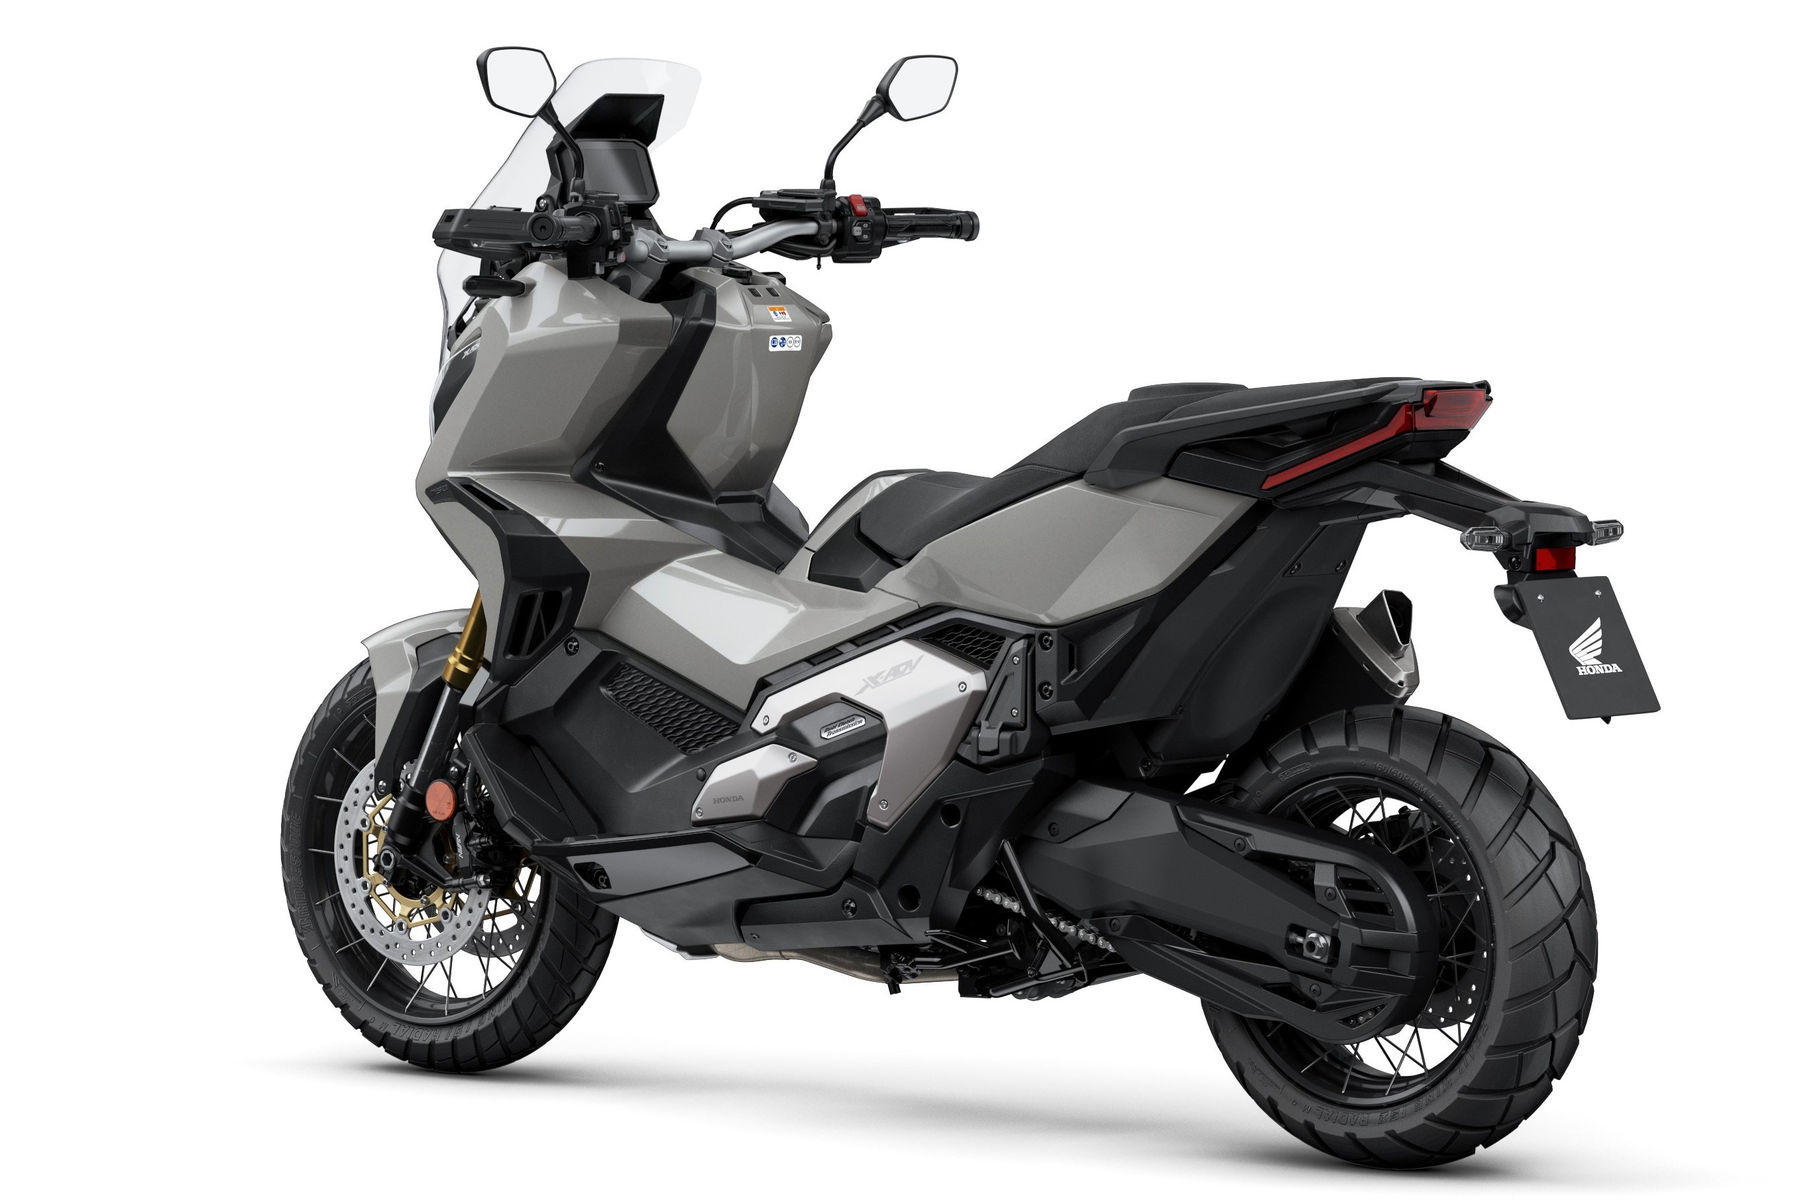 21 Honda X Adv Is Launched In Europe More Powerful Lighter And More Fun Motonews World